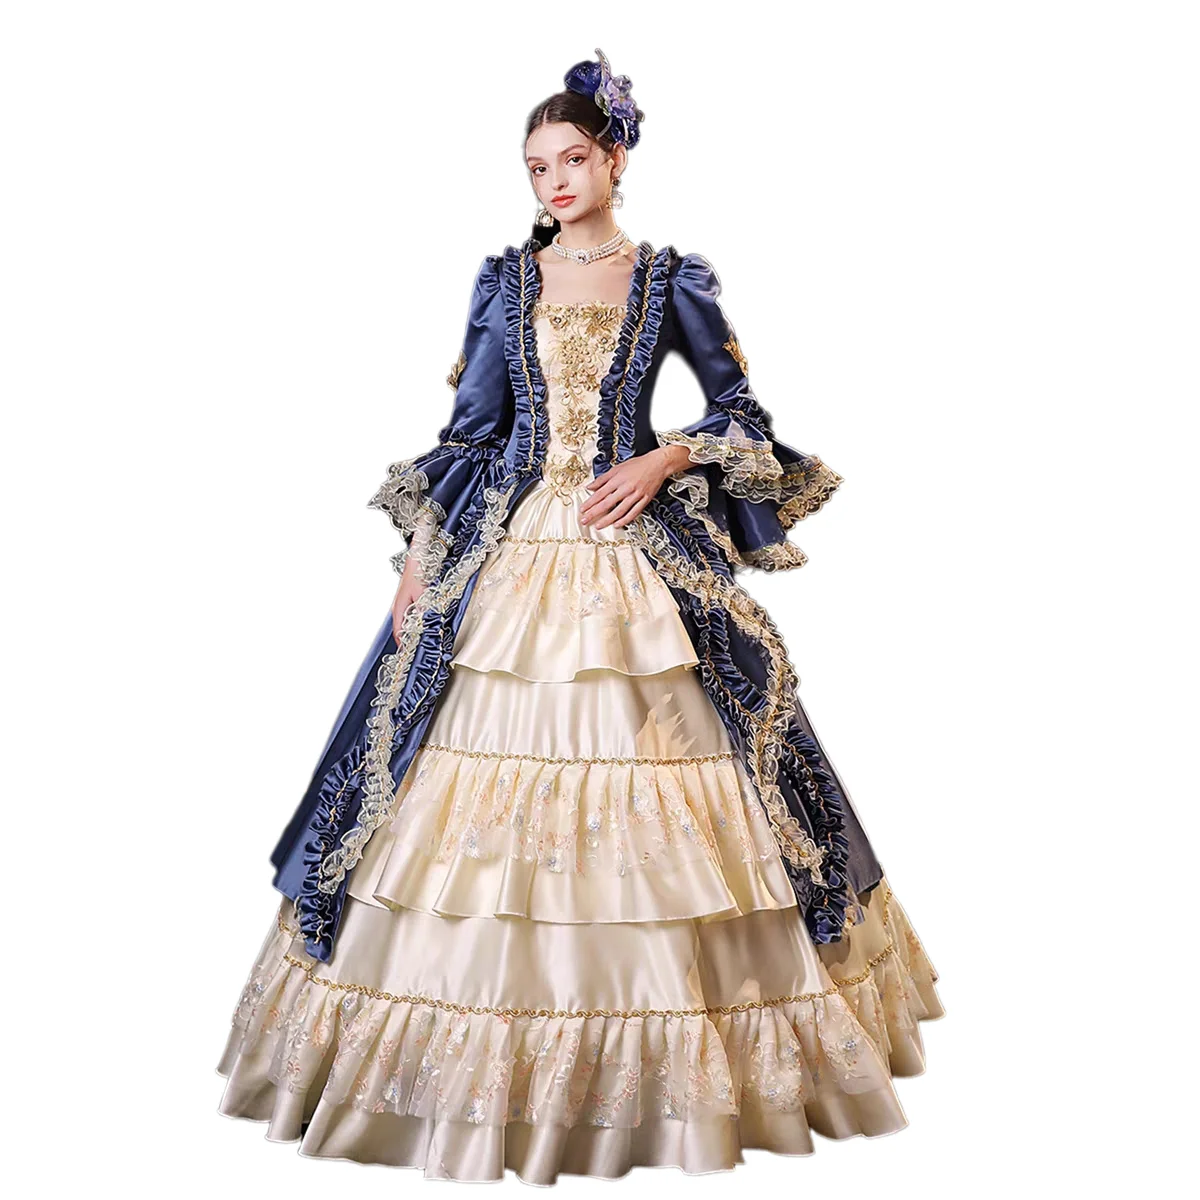 

KEMAO High-end Court Rococo Baroque Marie Antoinette Ball Gown 18th Century Renaissance Historical Period Evening Dresses